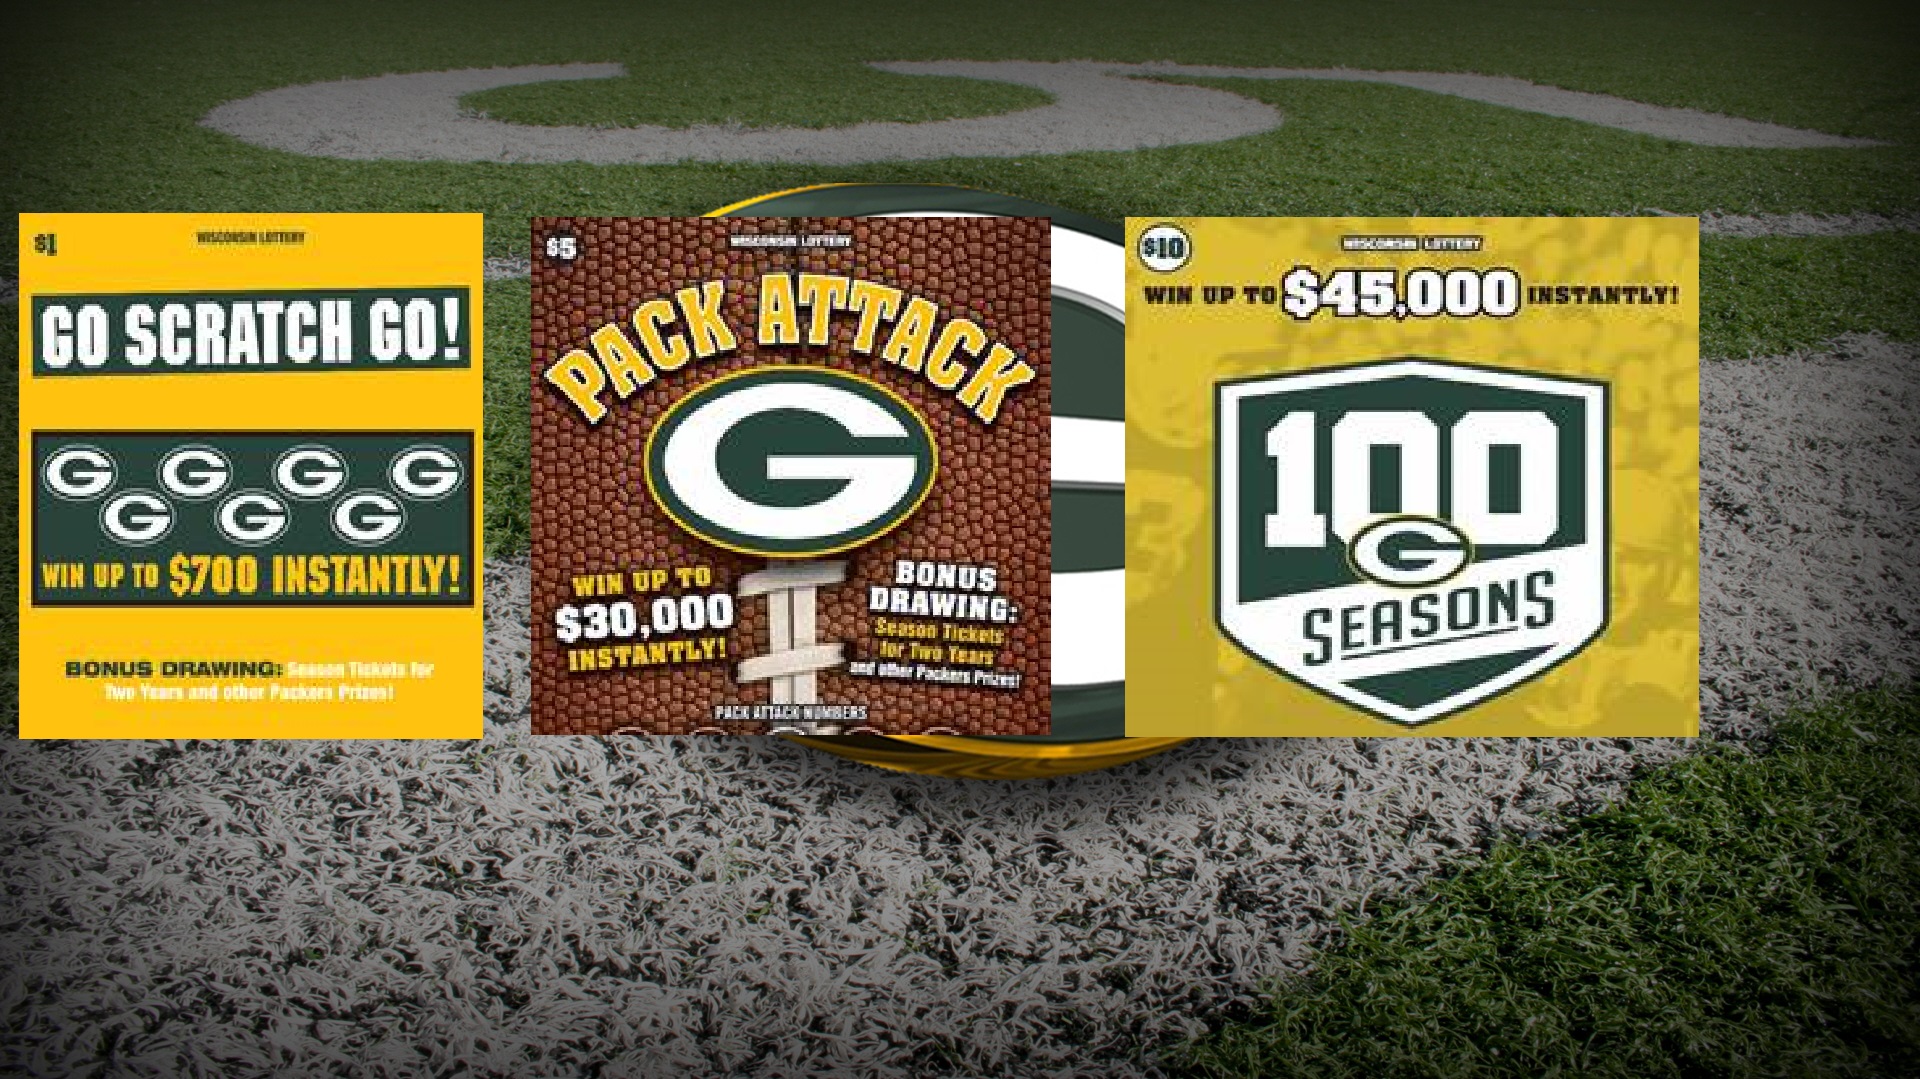 Wisconsin Lottery announces new Packers scratch tickets with chance to win  club seat season tickets